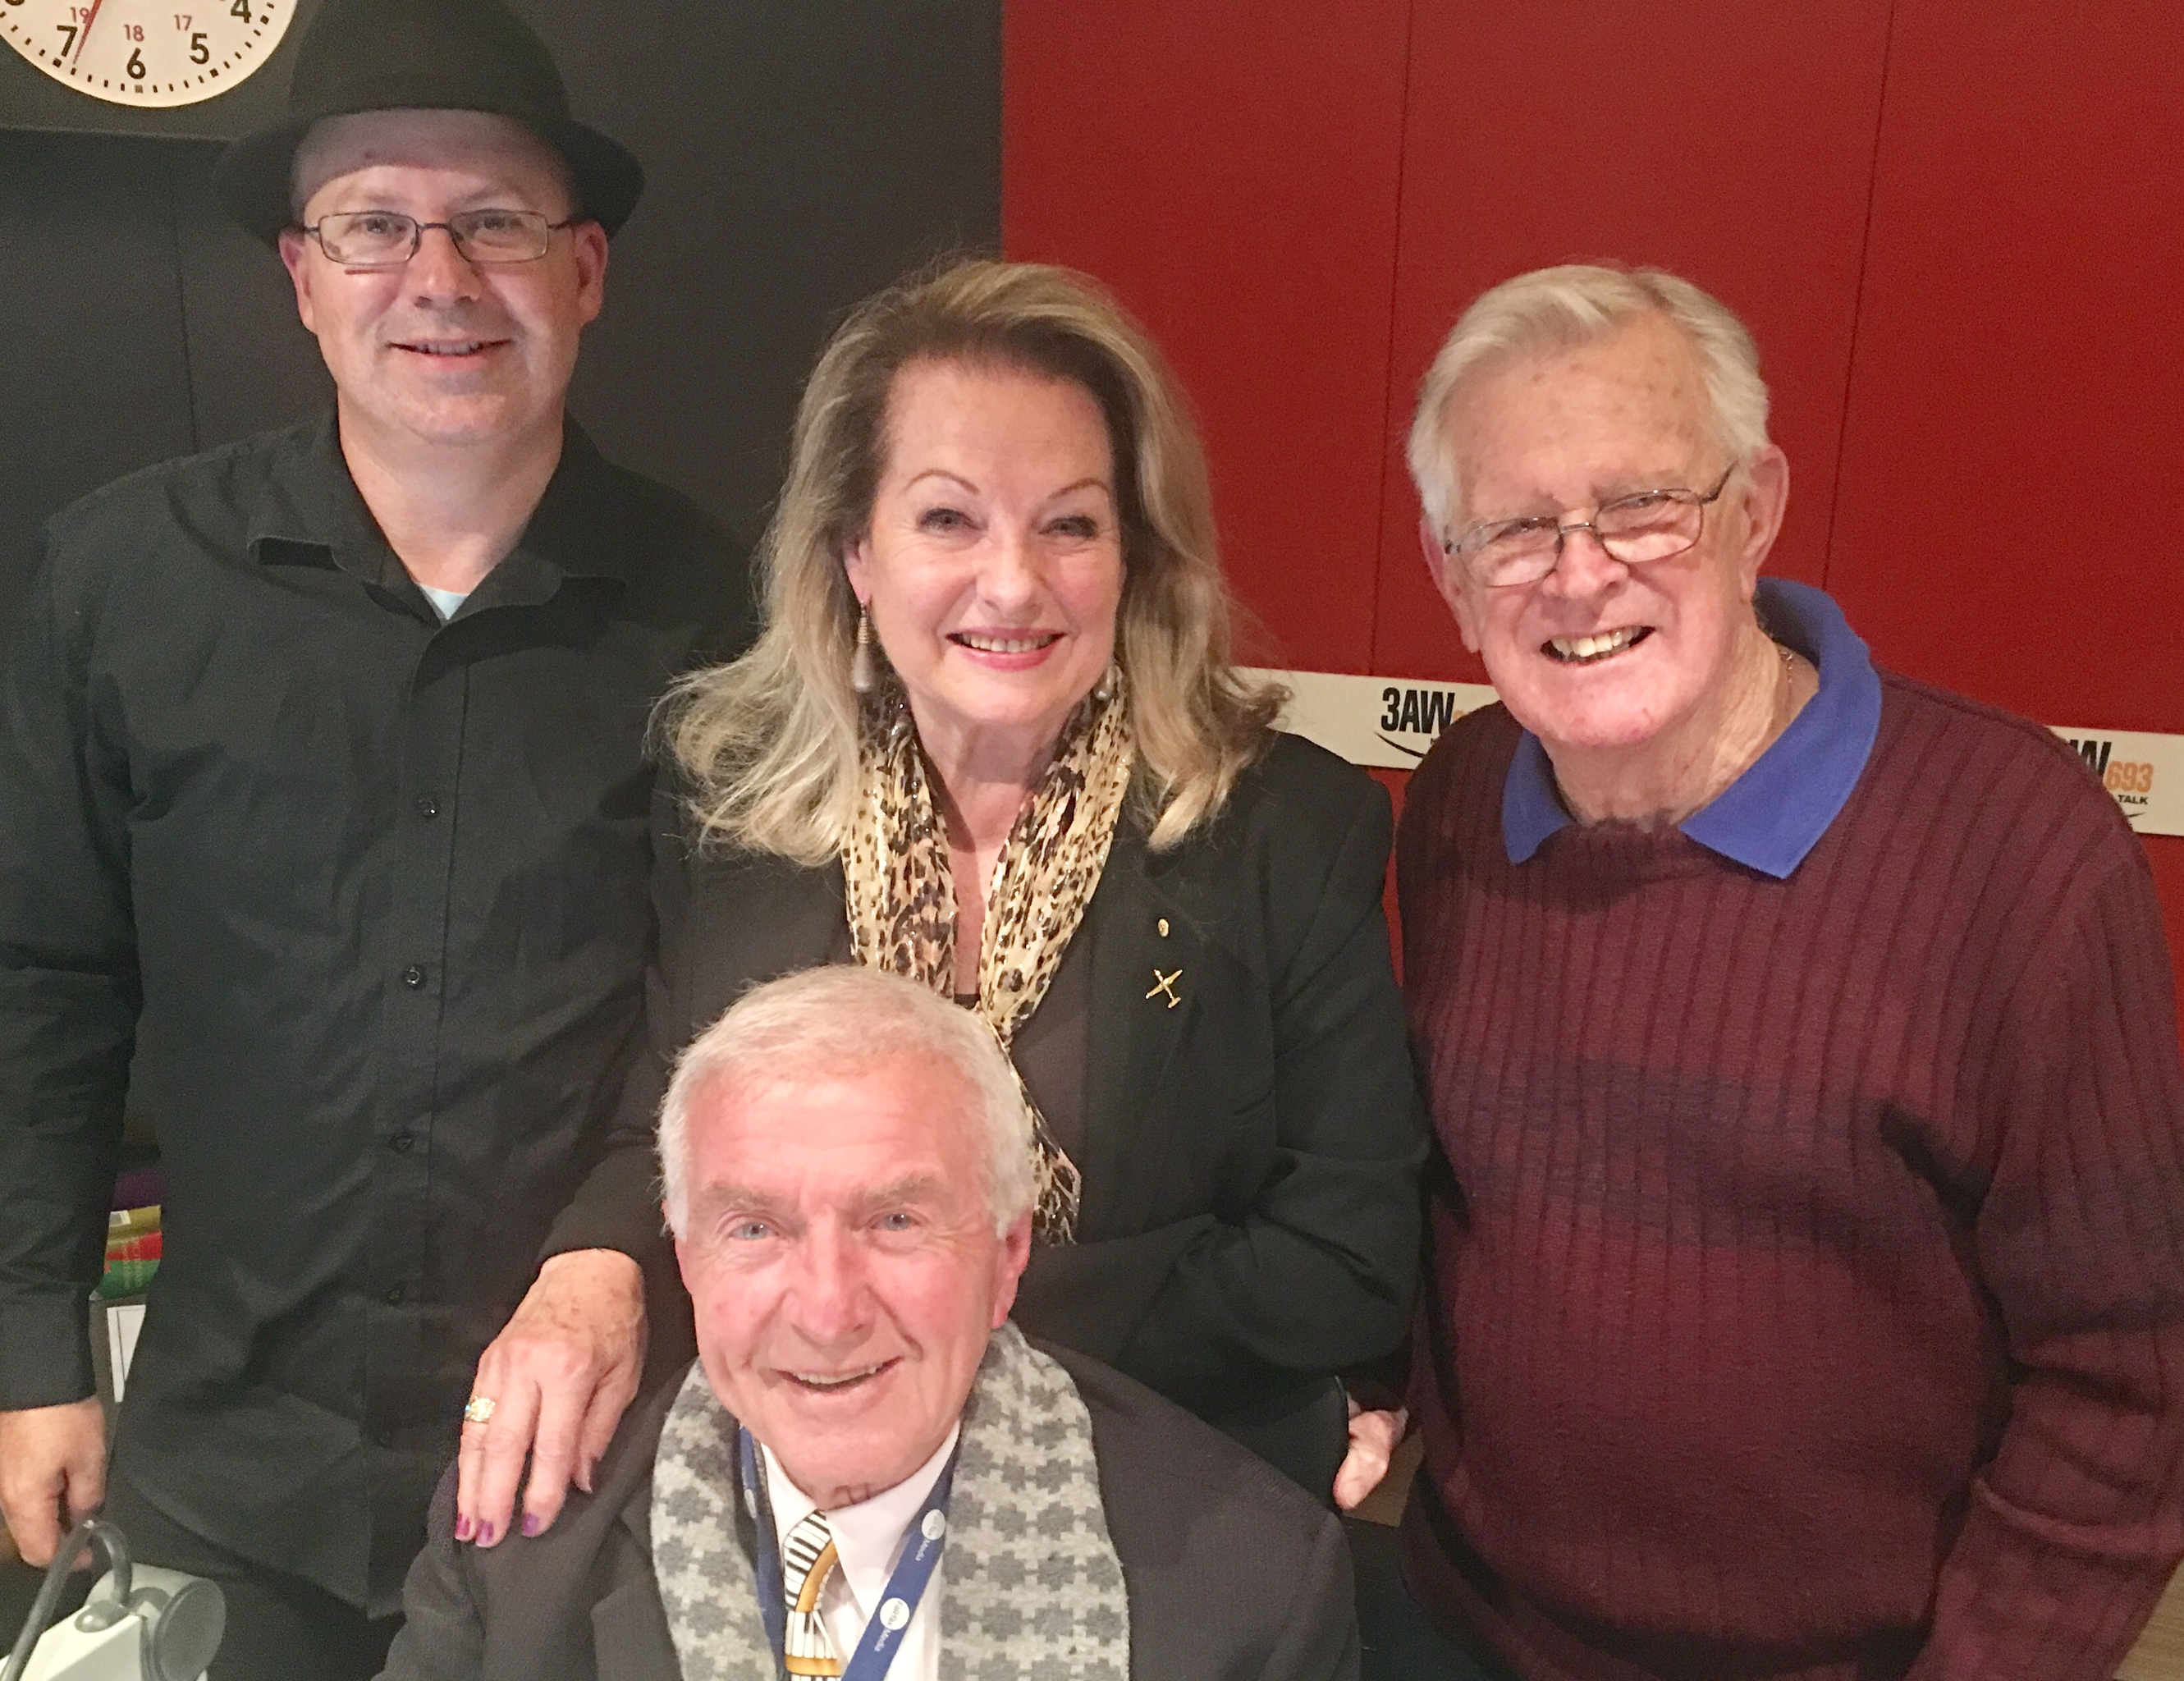 20170521 2216 3AW Roy Hampson and Annette Allison with Philip Brady and Simon Owens